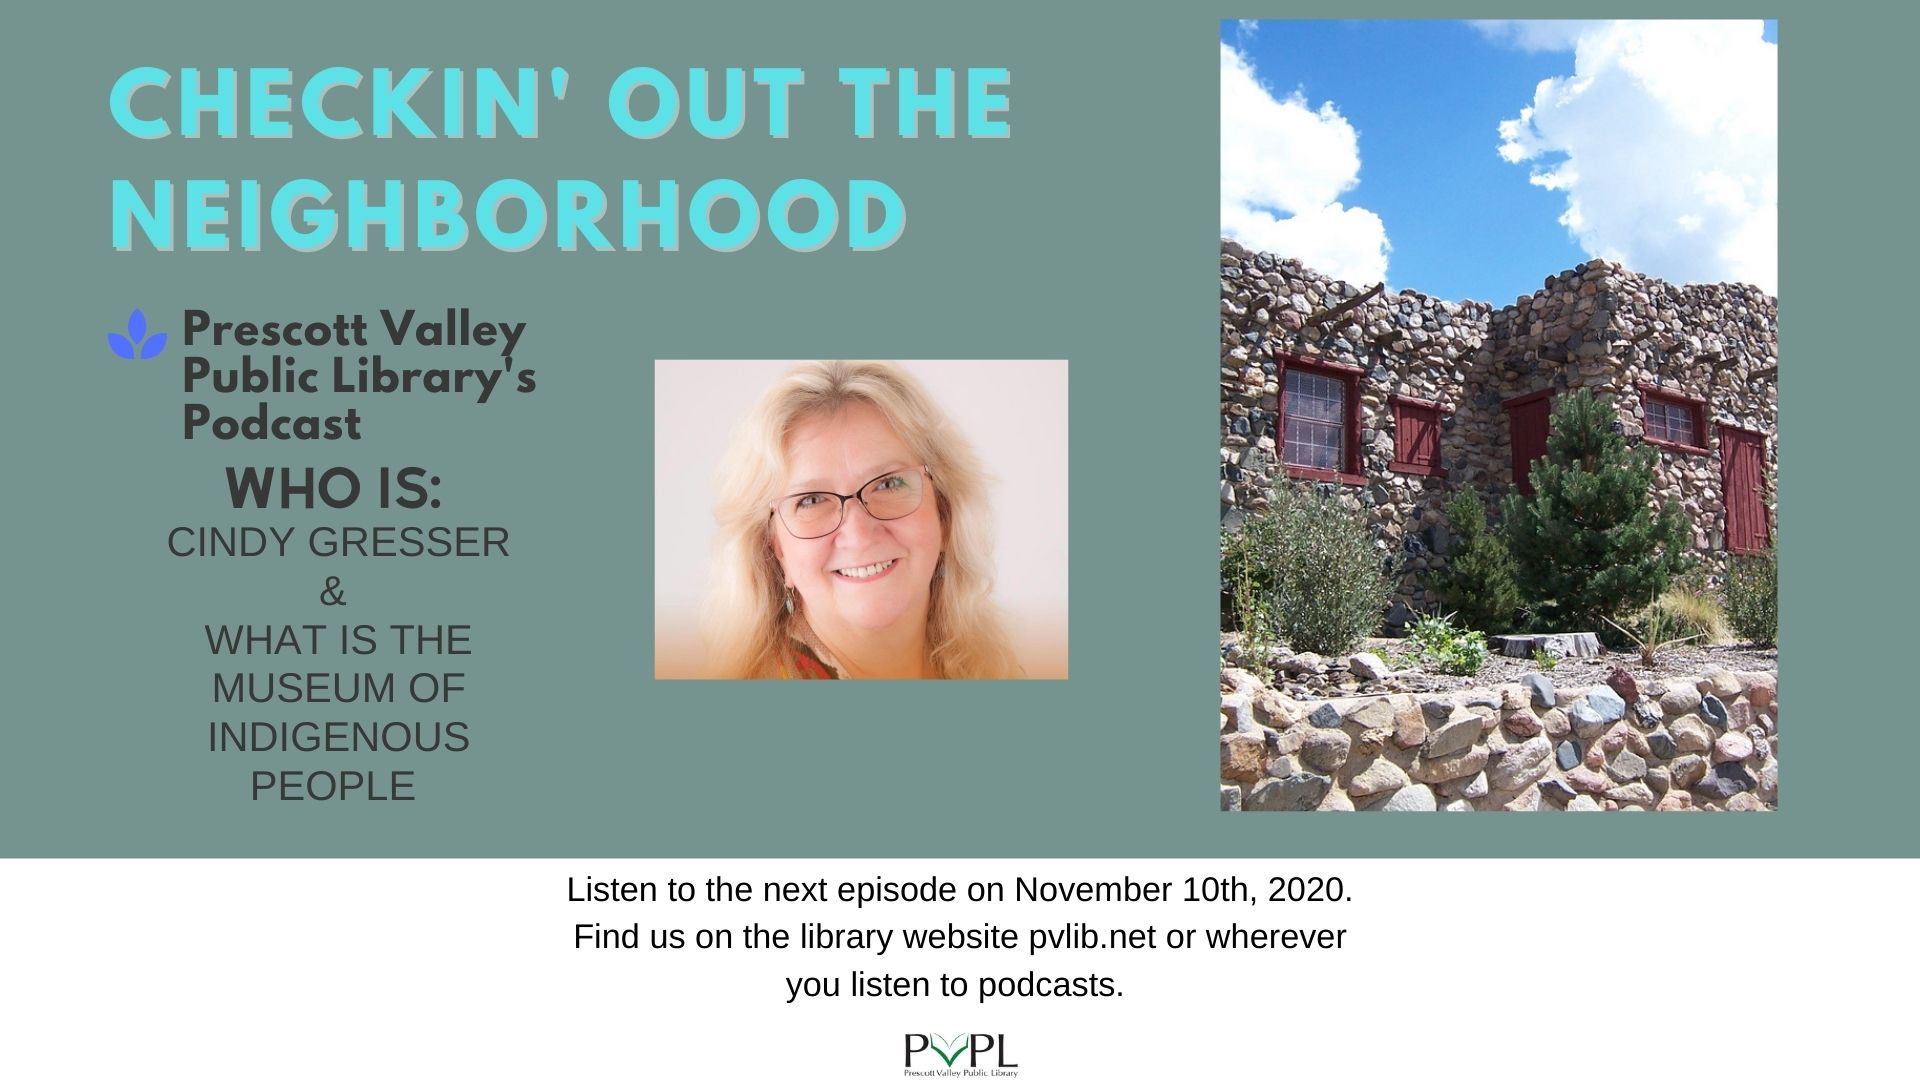 Checkin’ Out the Neighborhood PVPL’s Podcast – Who is Cindy Gresser & What is the Museum of Indigenous People